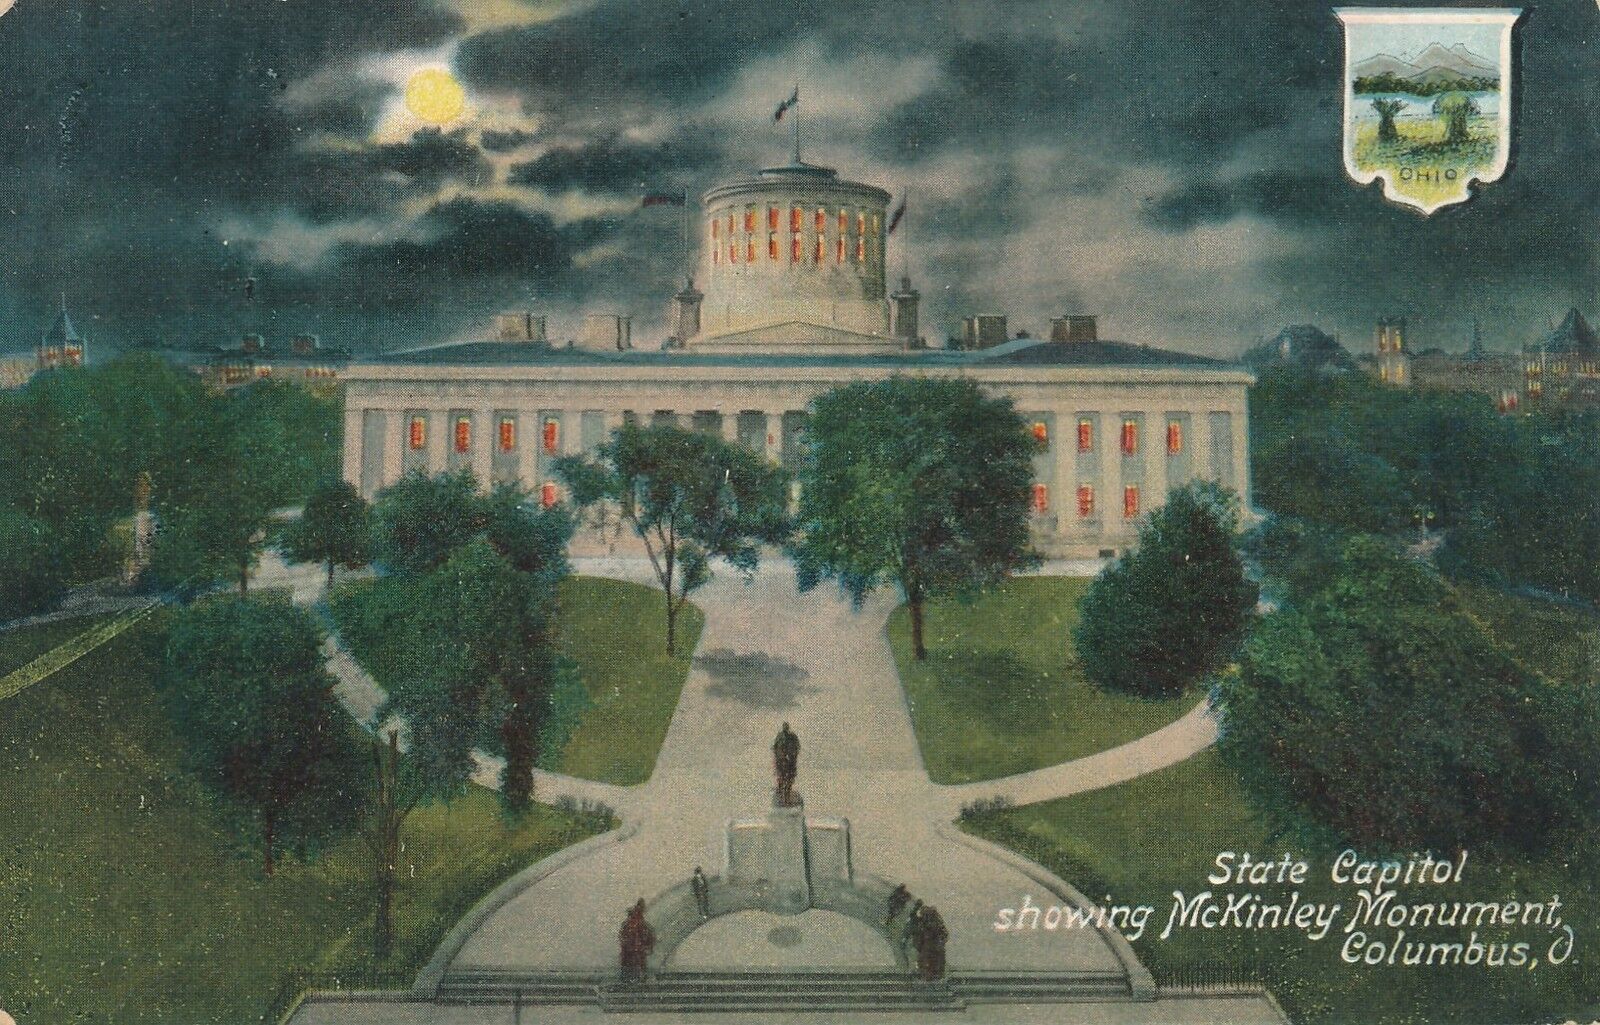 COLUMBUS OH – State Capitol showing McKinley Monument